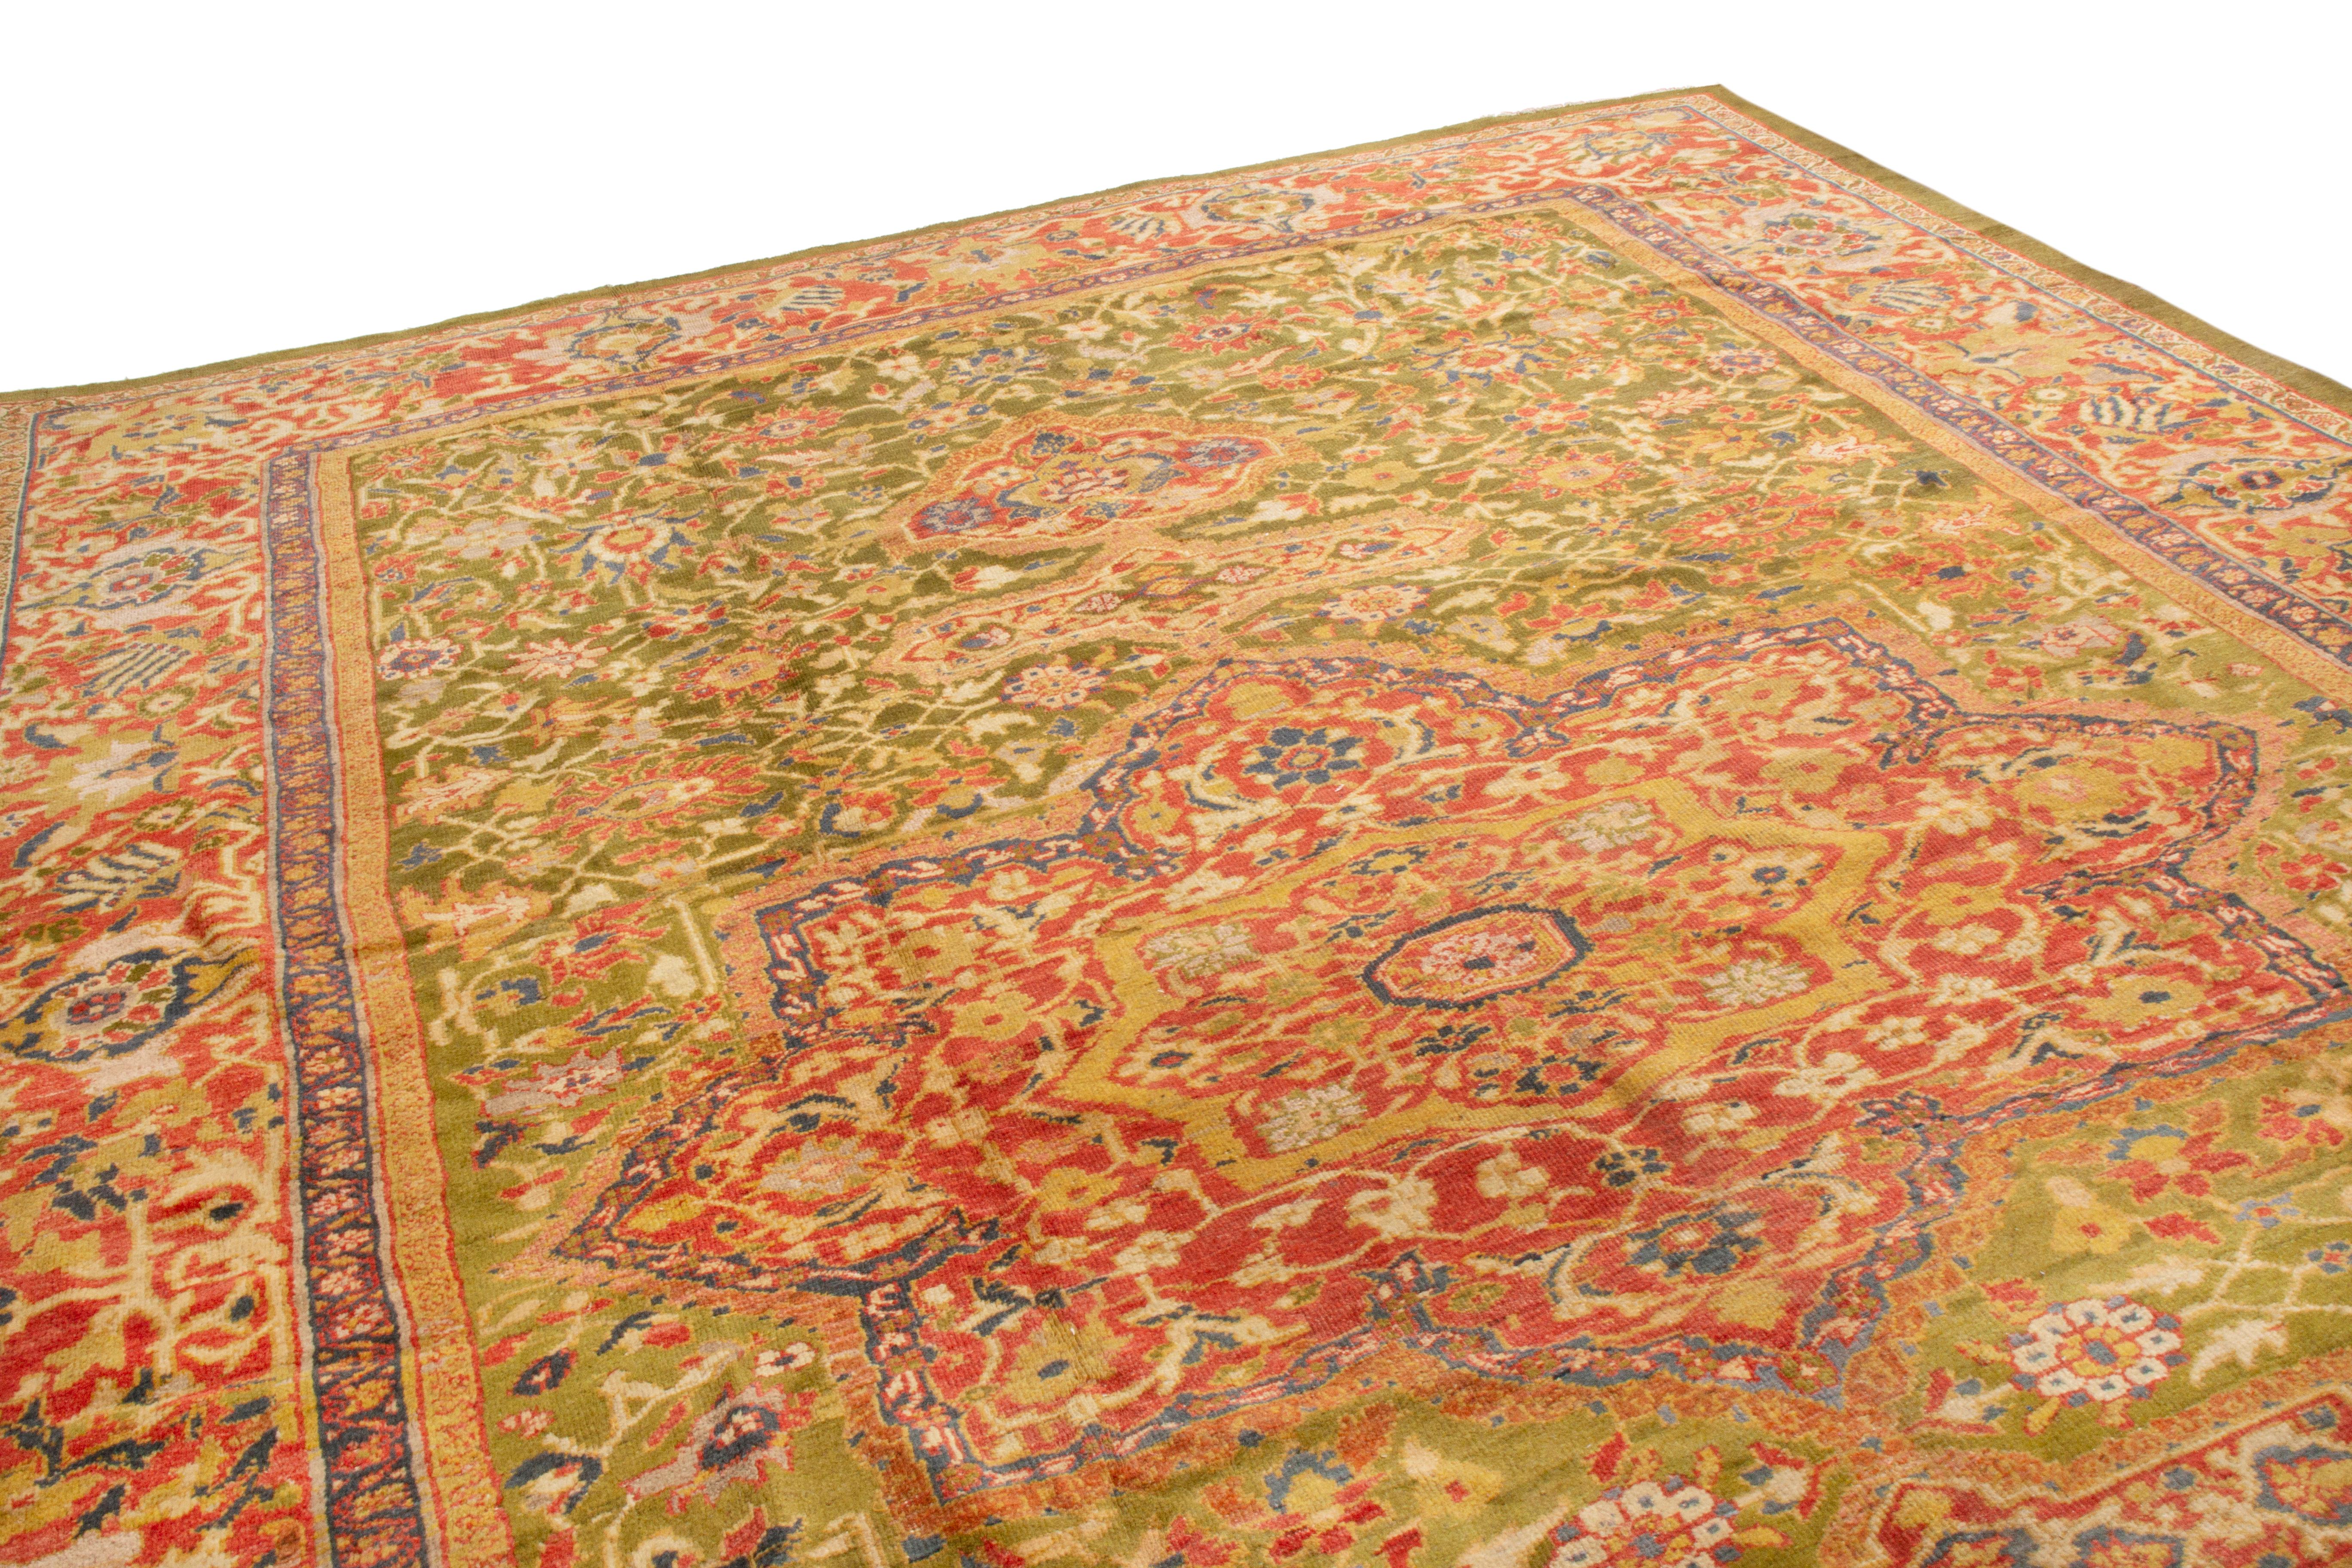 This antique Sultanabad floral rug has very distinct bright colors, inspired from Persian Sultanabad designs and Oushak colors of the area. While most know this piece as a Persian Sultanabad, it may be from a family of Indian carpets made in the